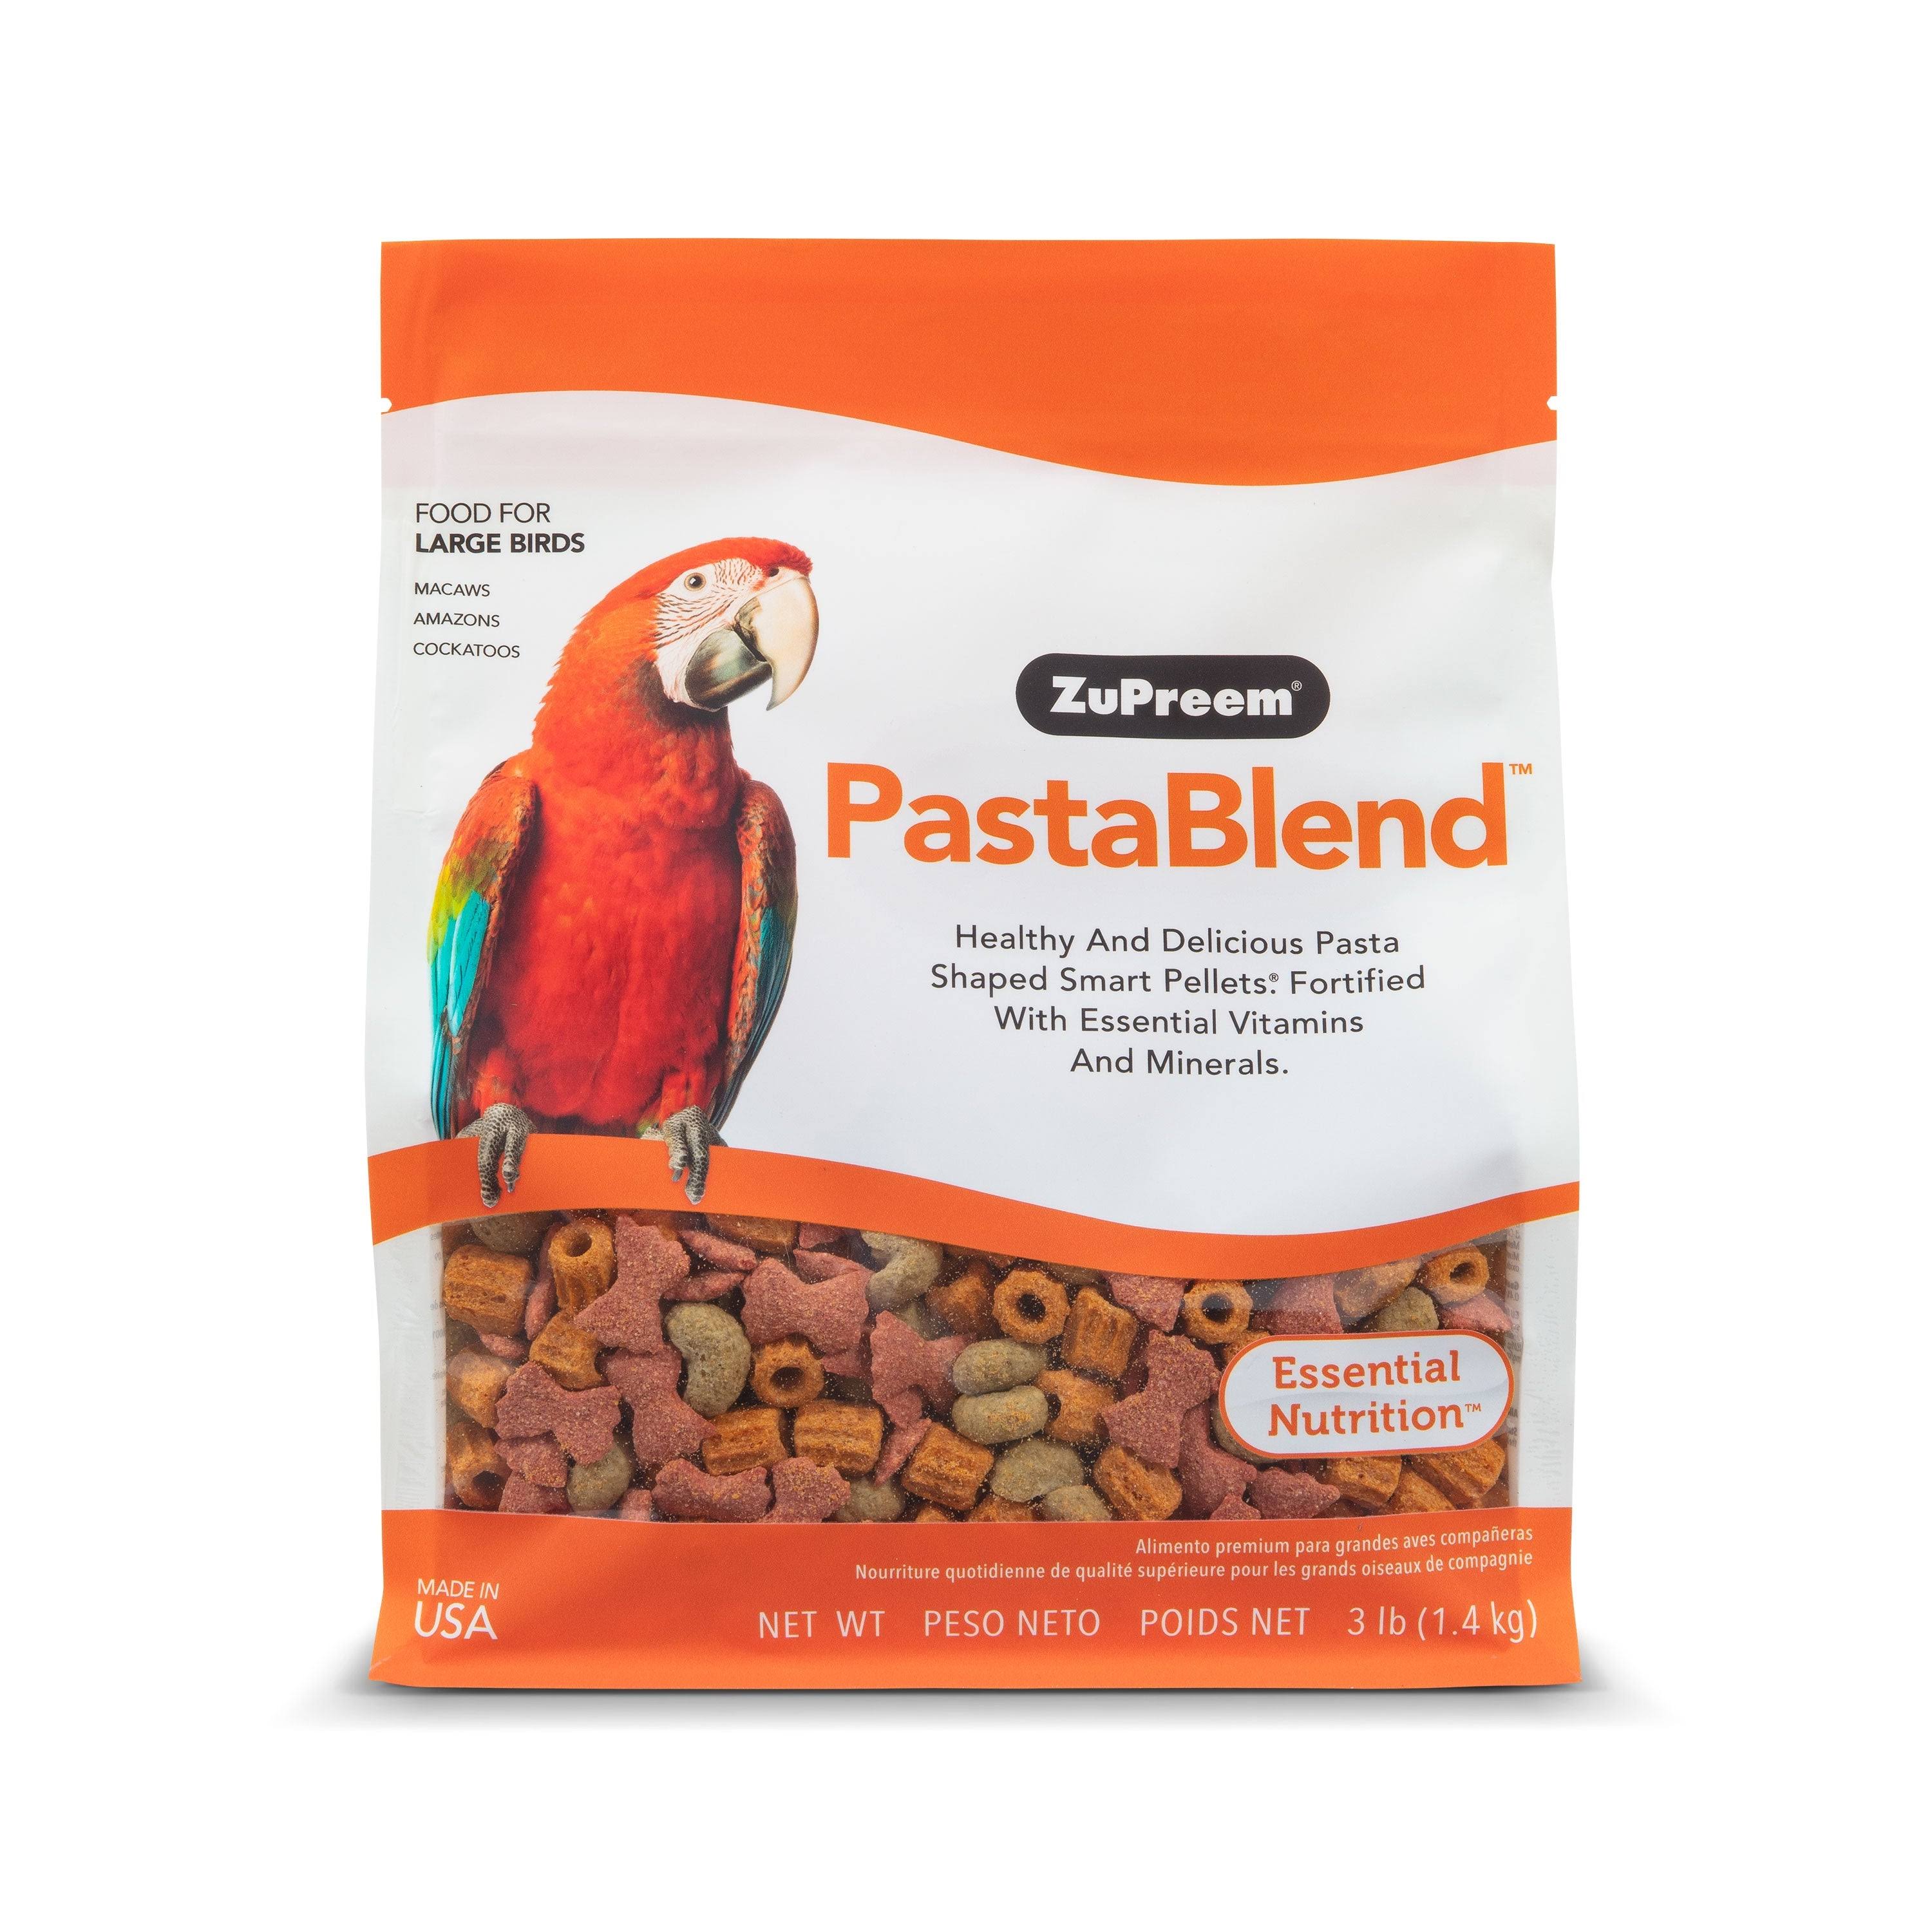 Zupreem PastaBlend Food for Large Birds - 3 lbs